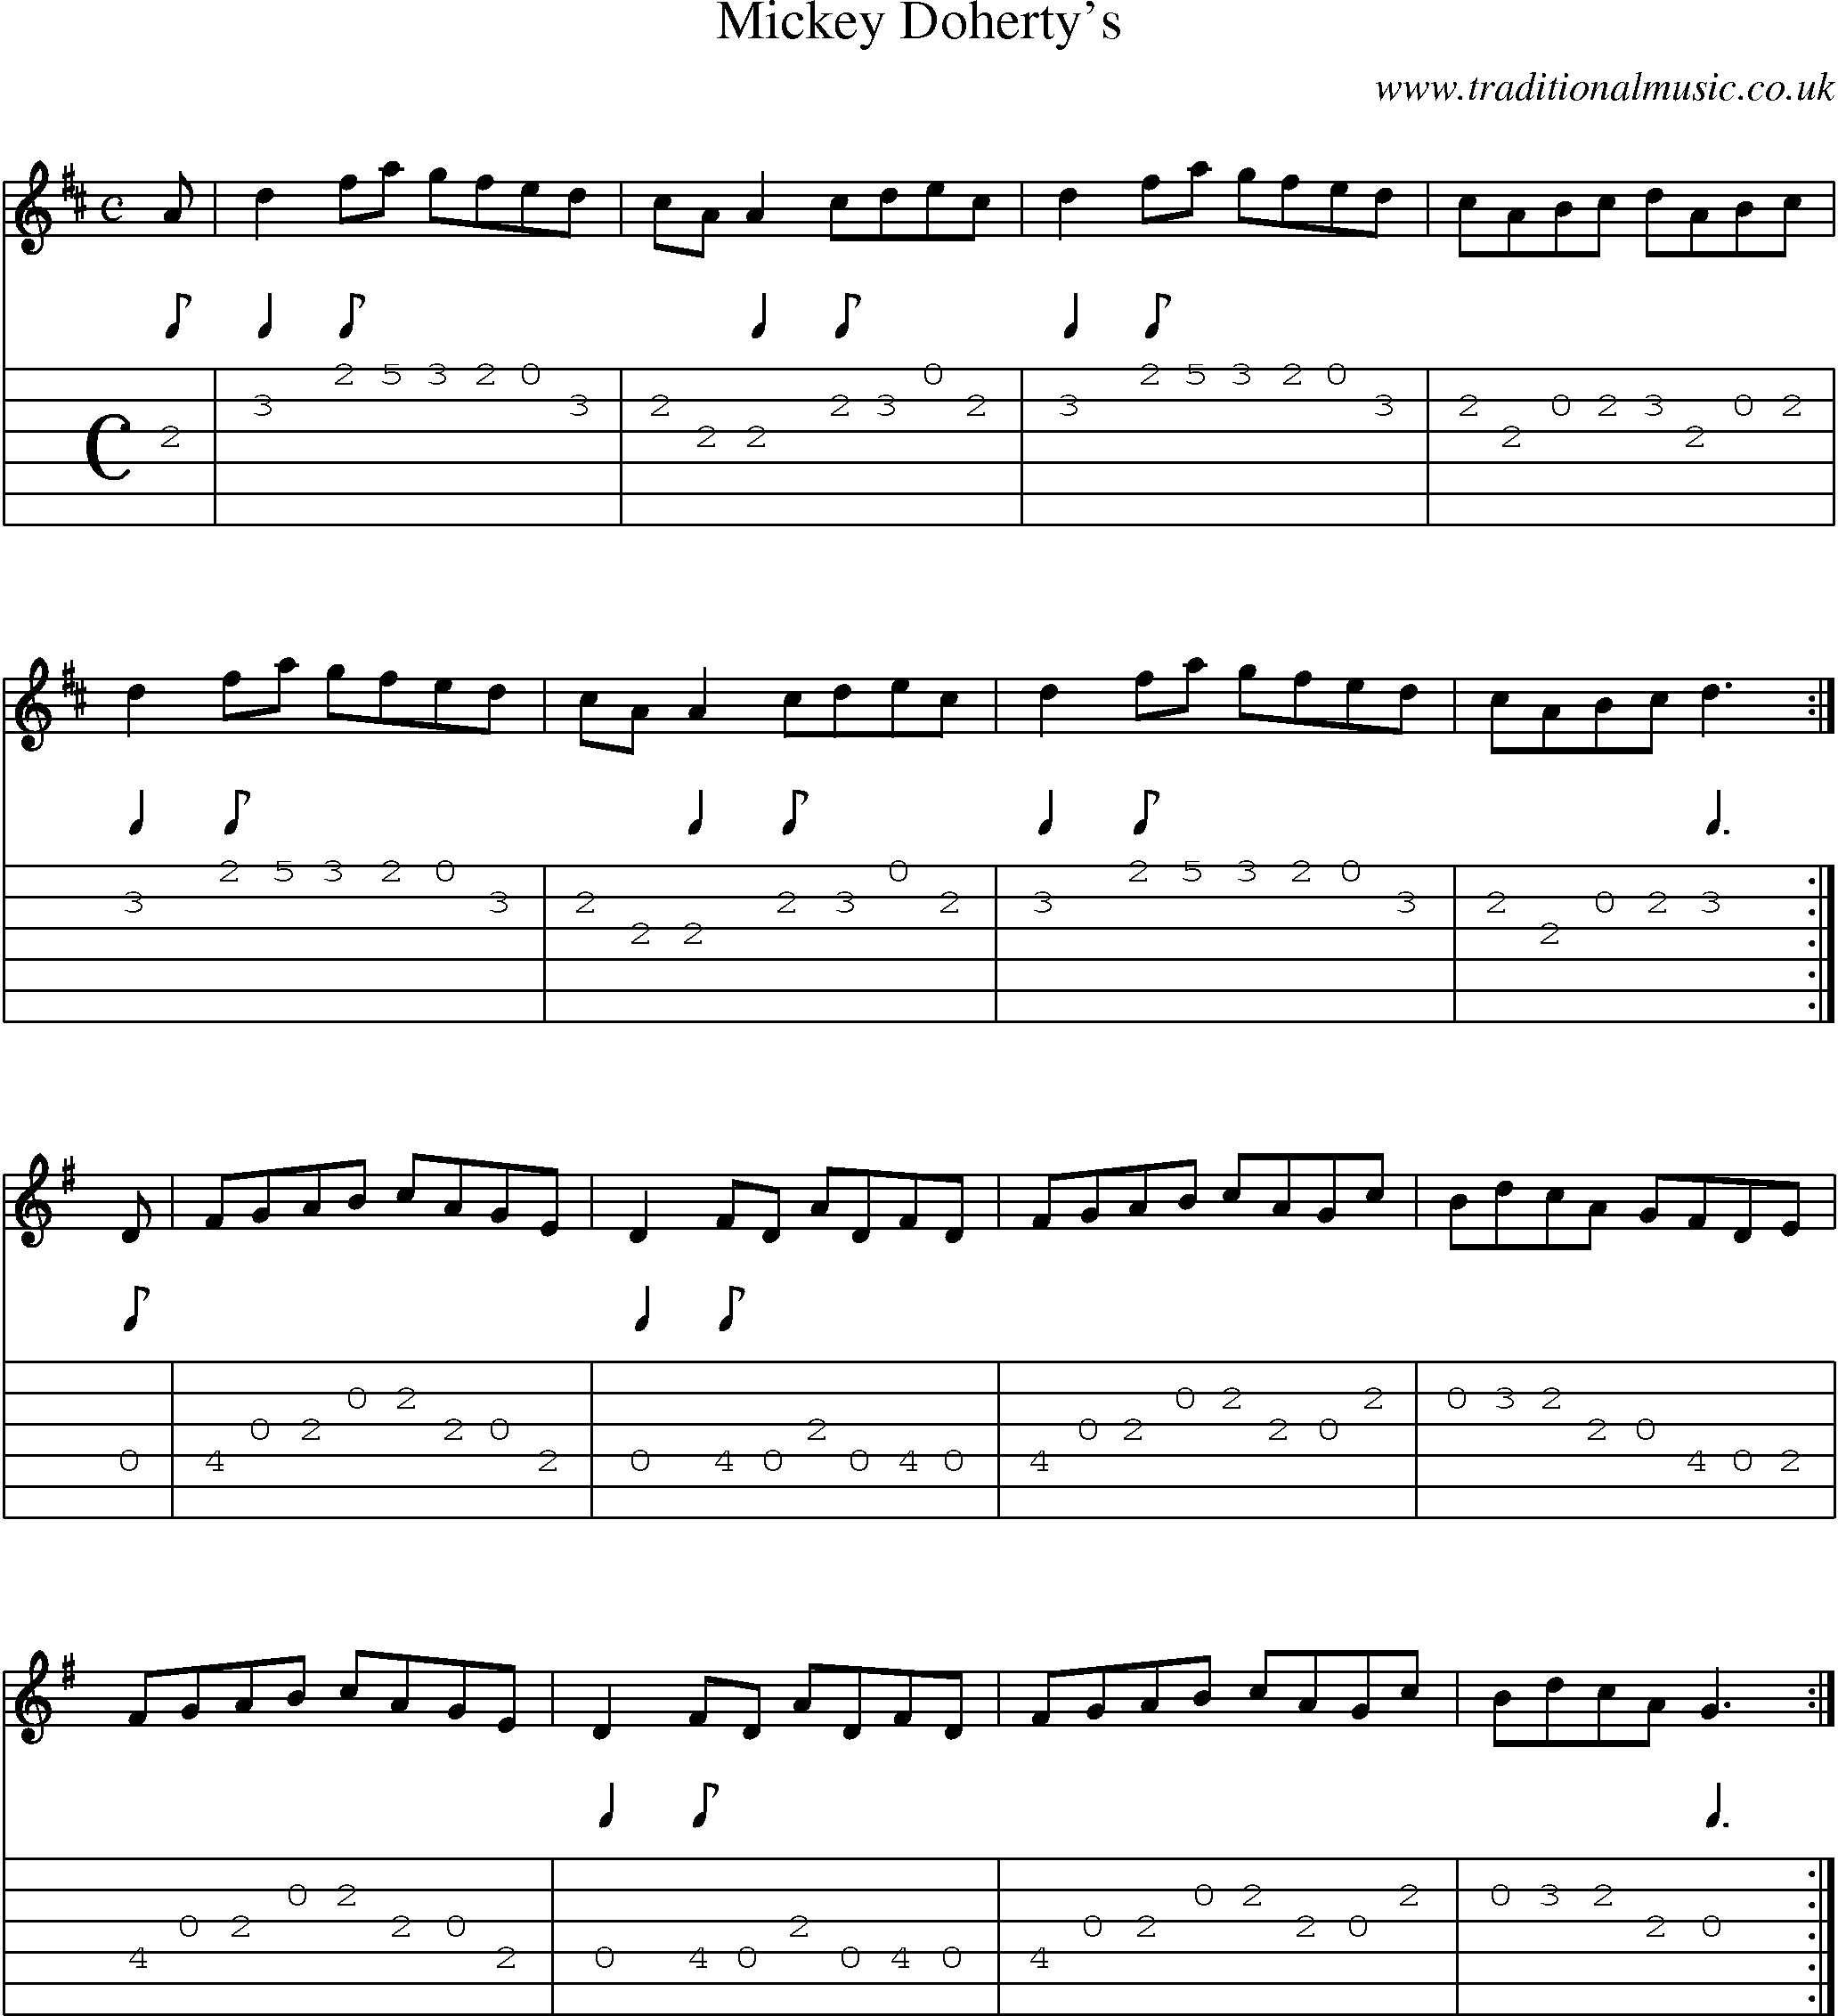 Music Score and Guitar Tabs for Mickey Dohertys